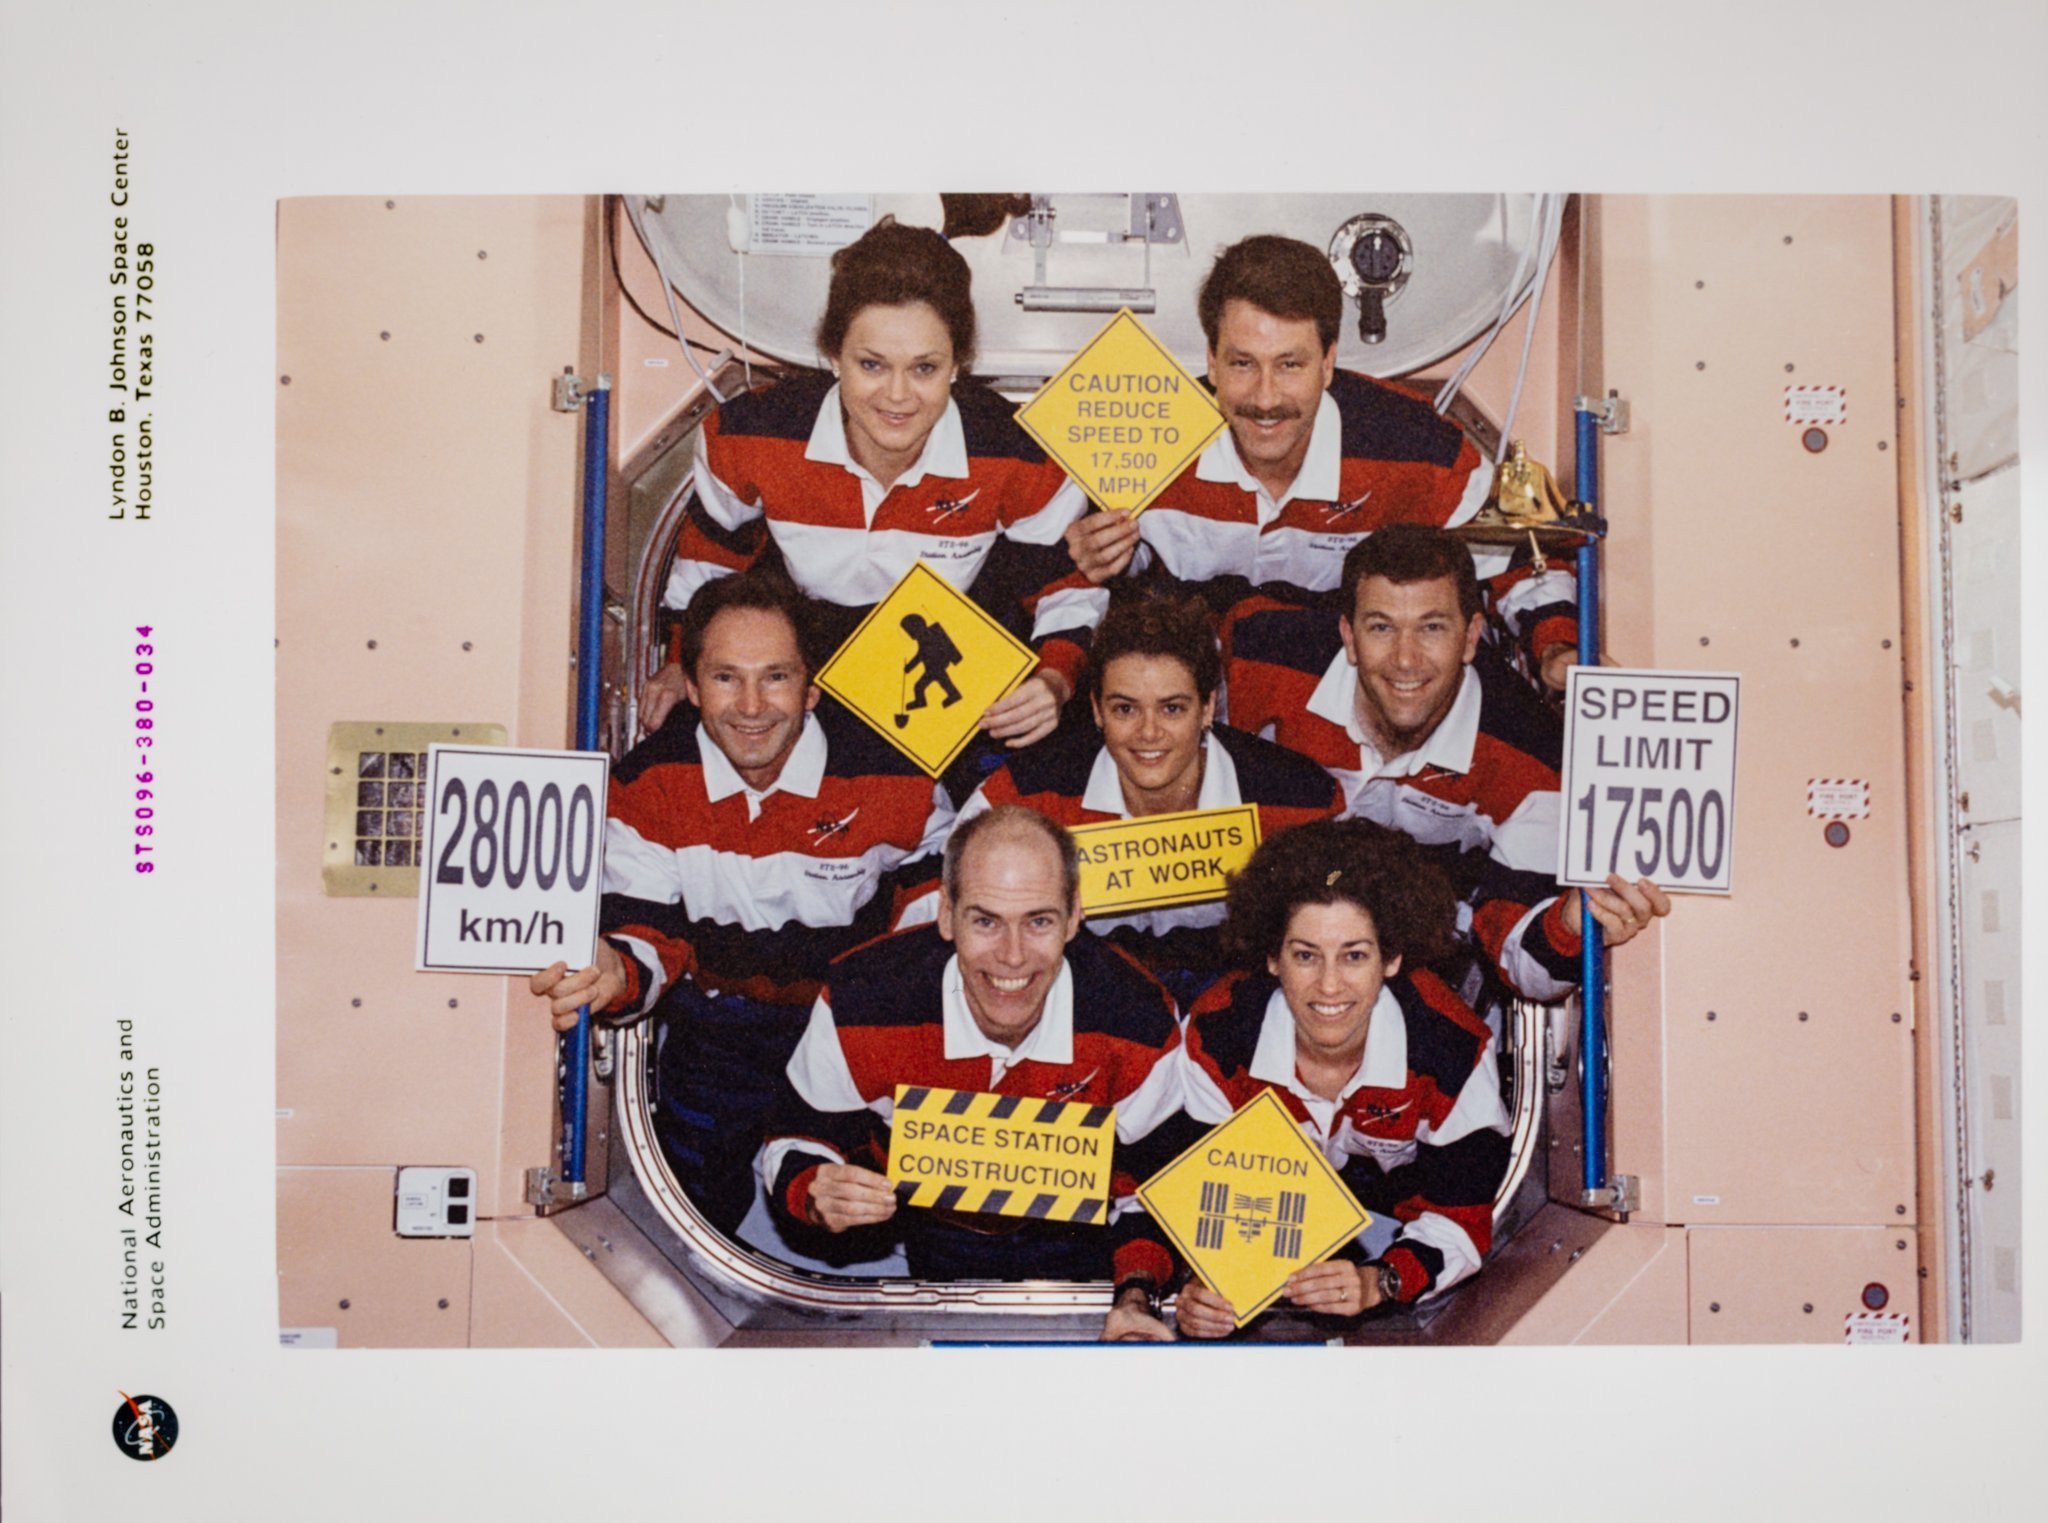 Crew of STS-96 (Space Shuttle Discovery) in 1999 (Copy)